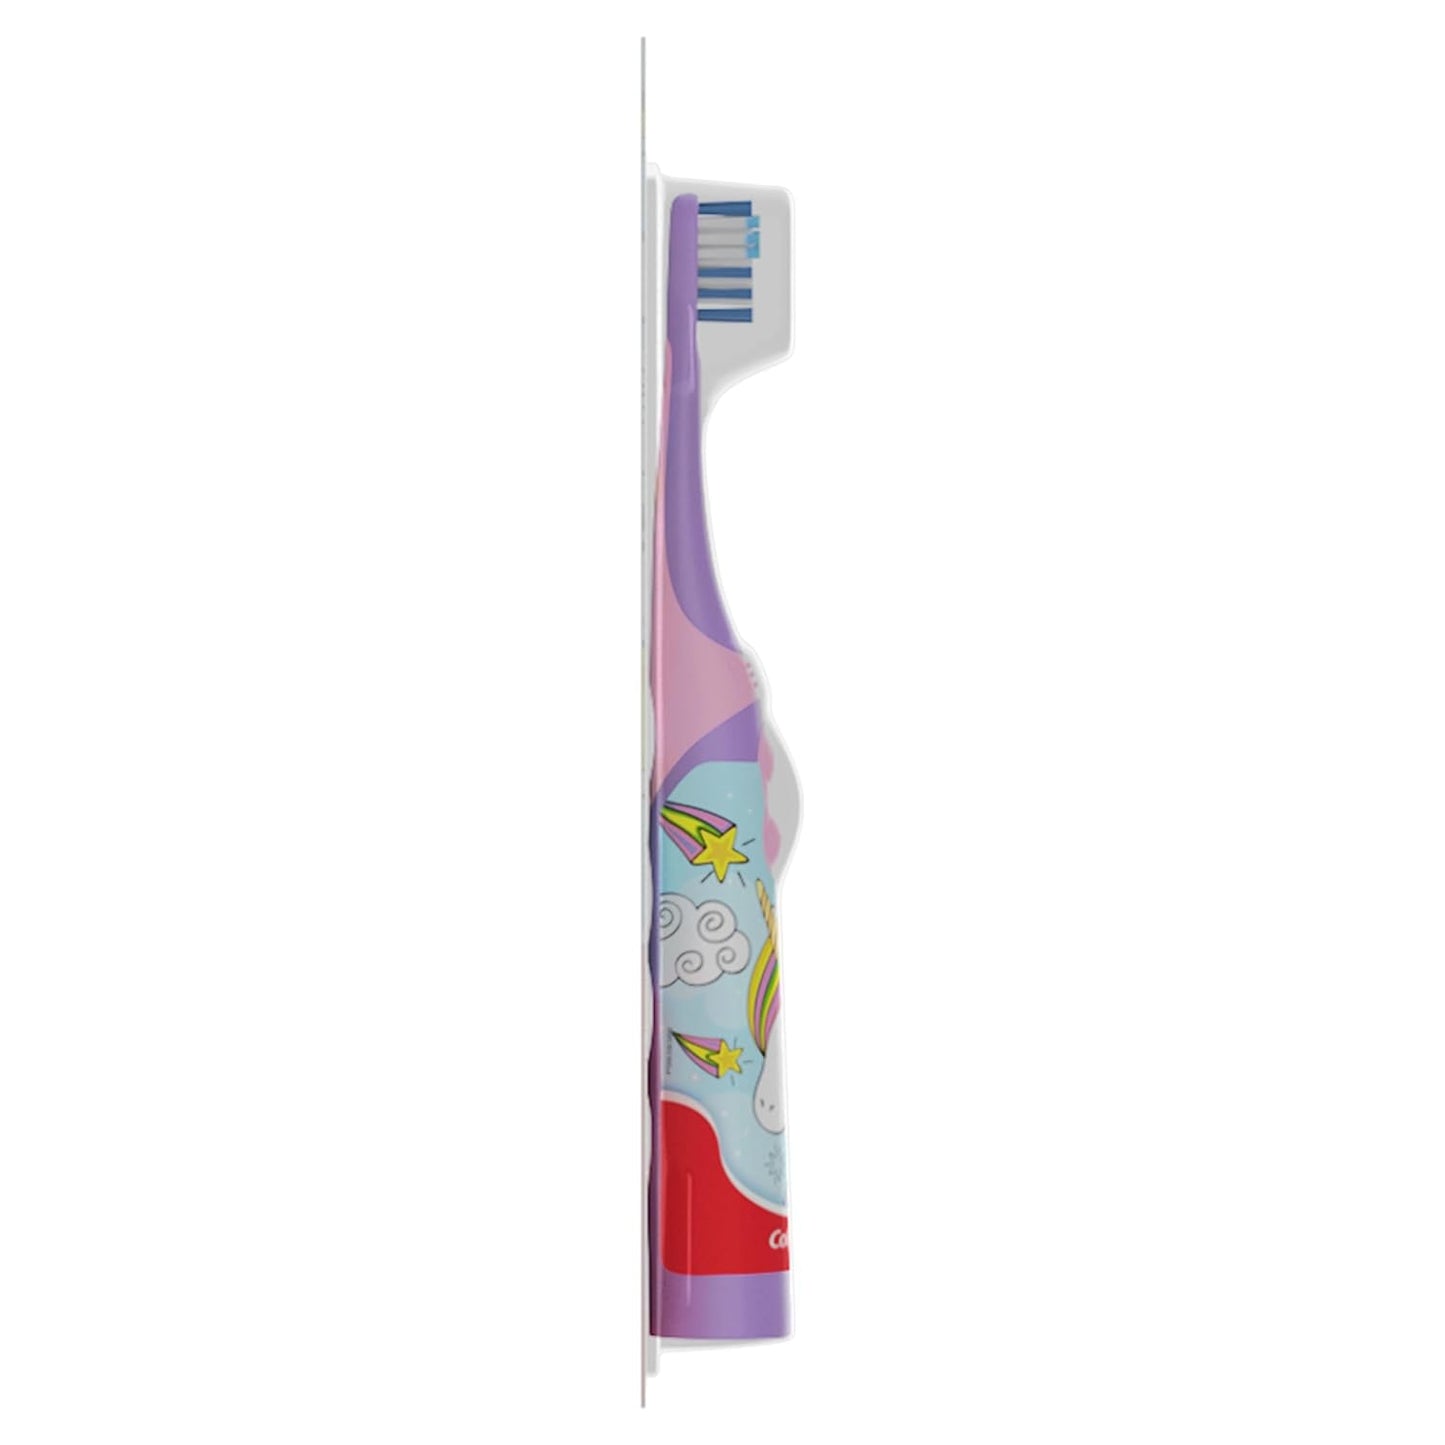 Colgate Kids Battery Powered Toothbrush, Batman, Extra Soft Toothbrush, Ages 3 and Up, 1 Pack , Colors May Vary